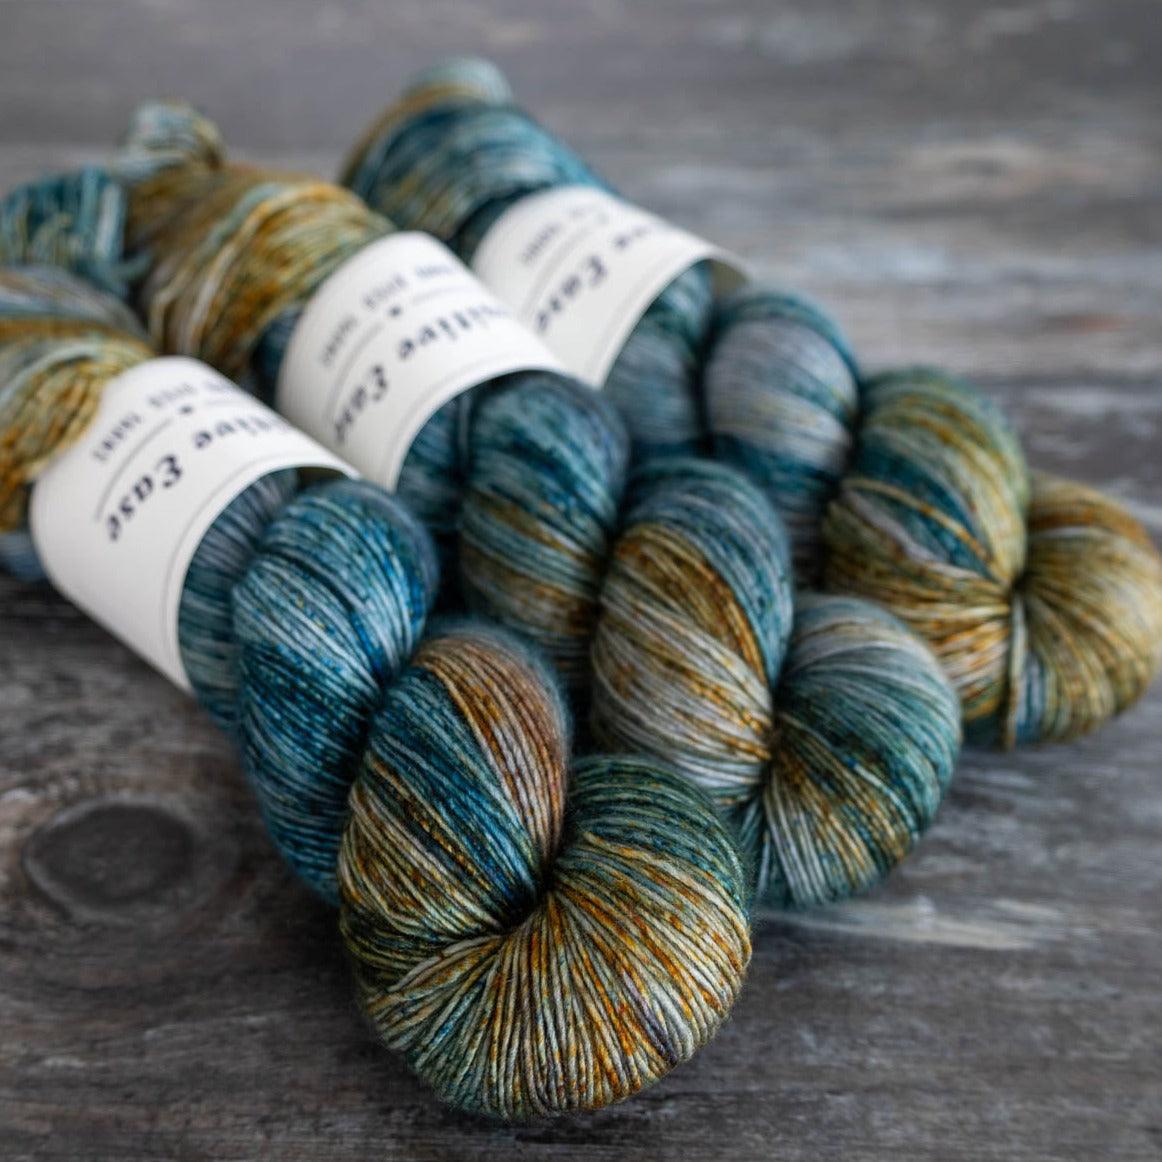 Positive Ease Positive Ease Merino Singles - Pretty Obvious - 4ply Knitting Yarn